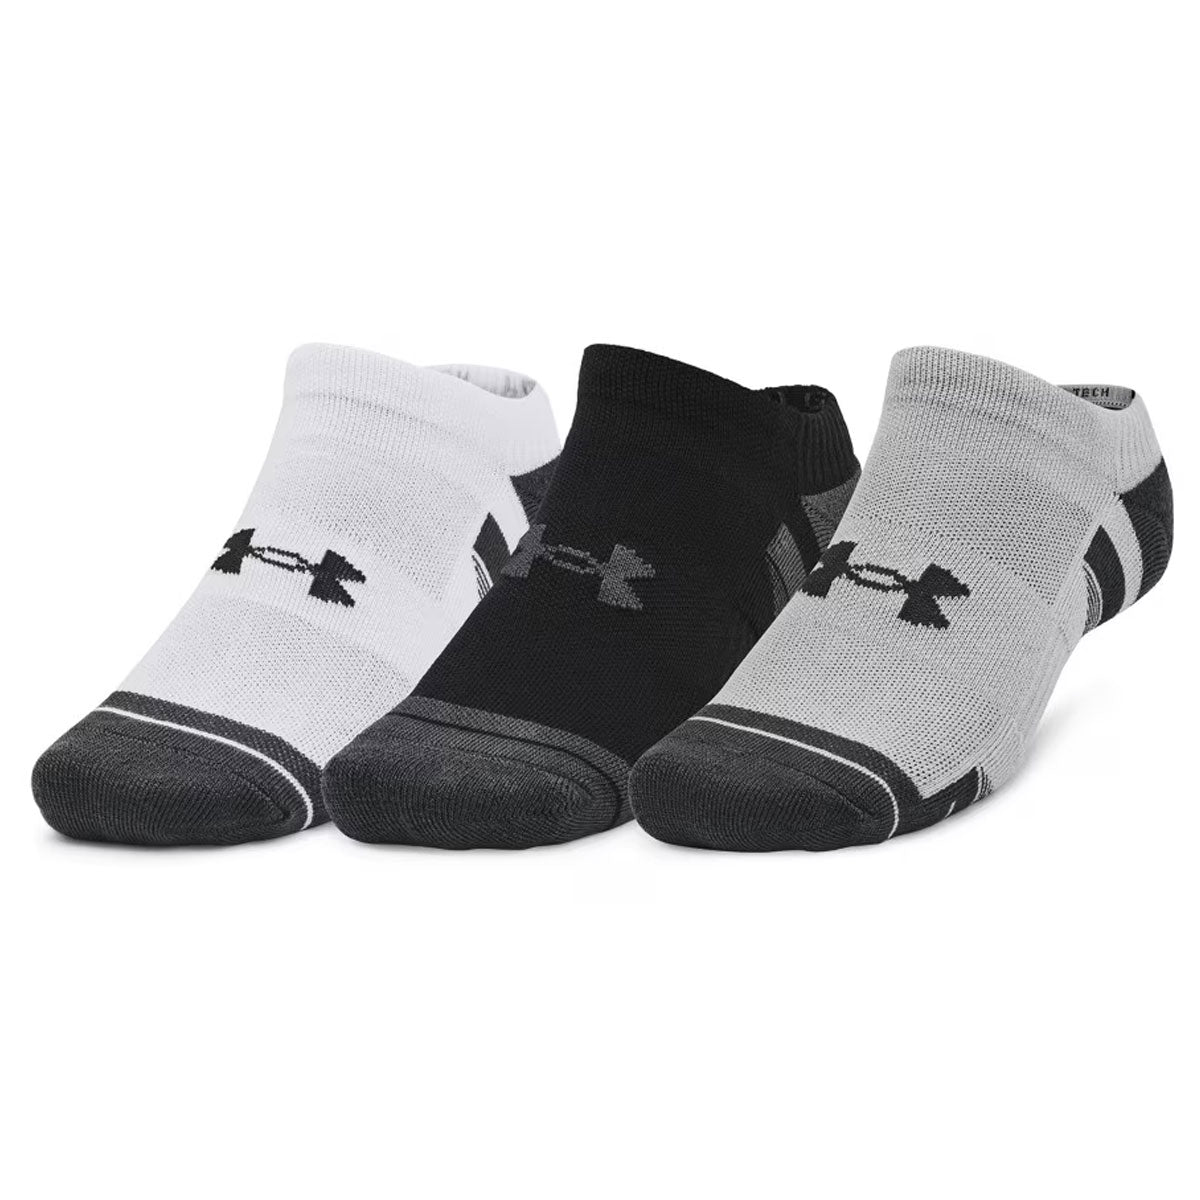 Under Armour Performance Tech 3 Pack No Show Socks - Adult - Grey